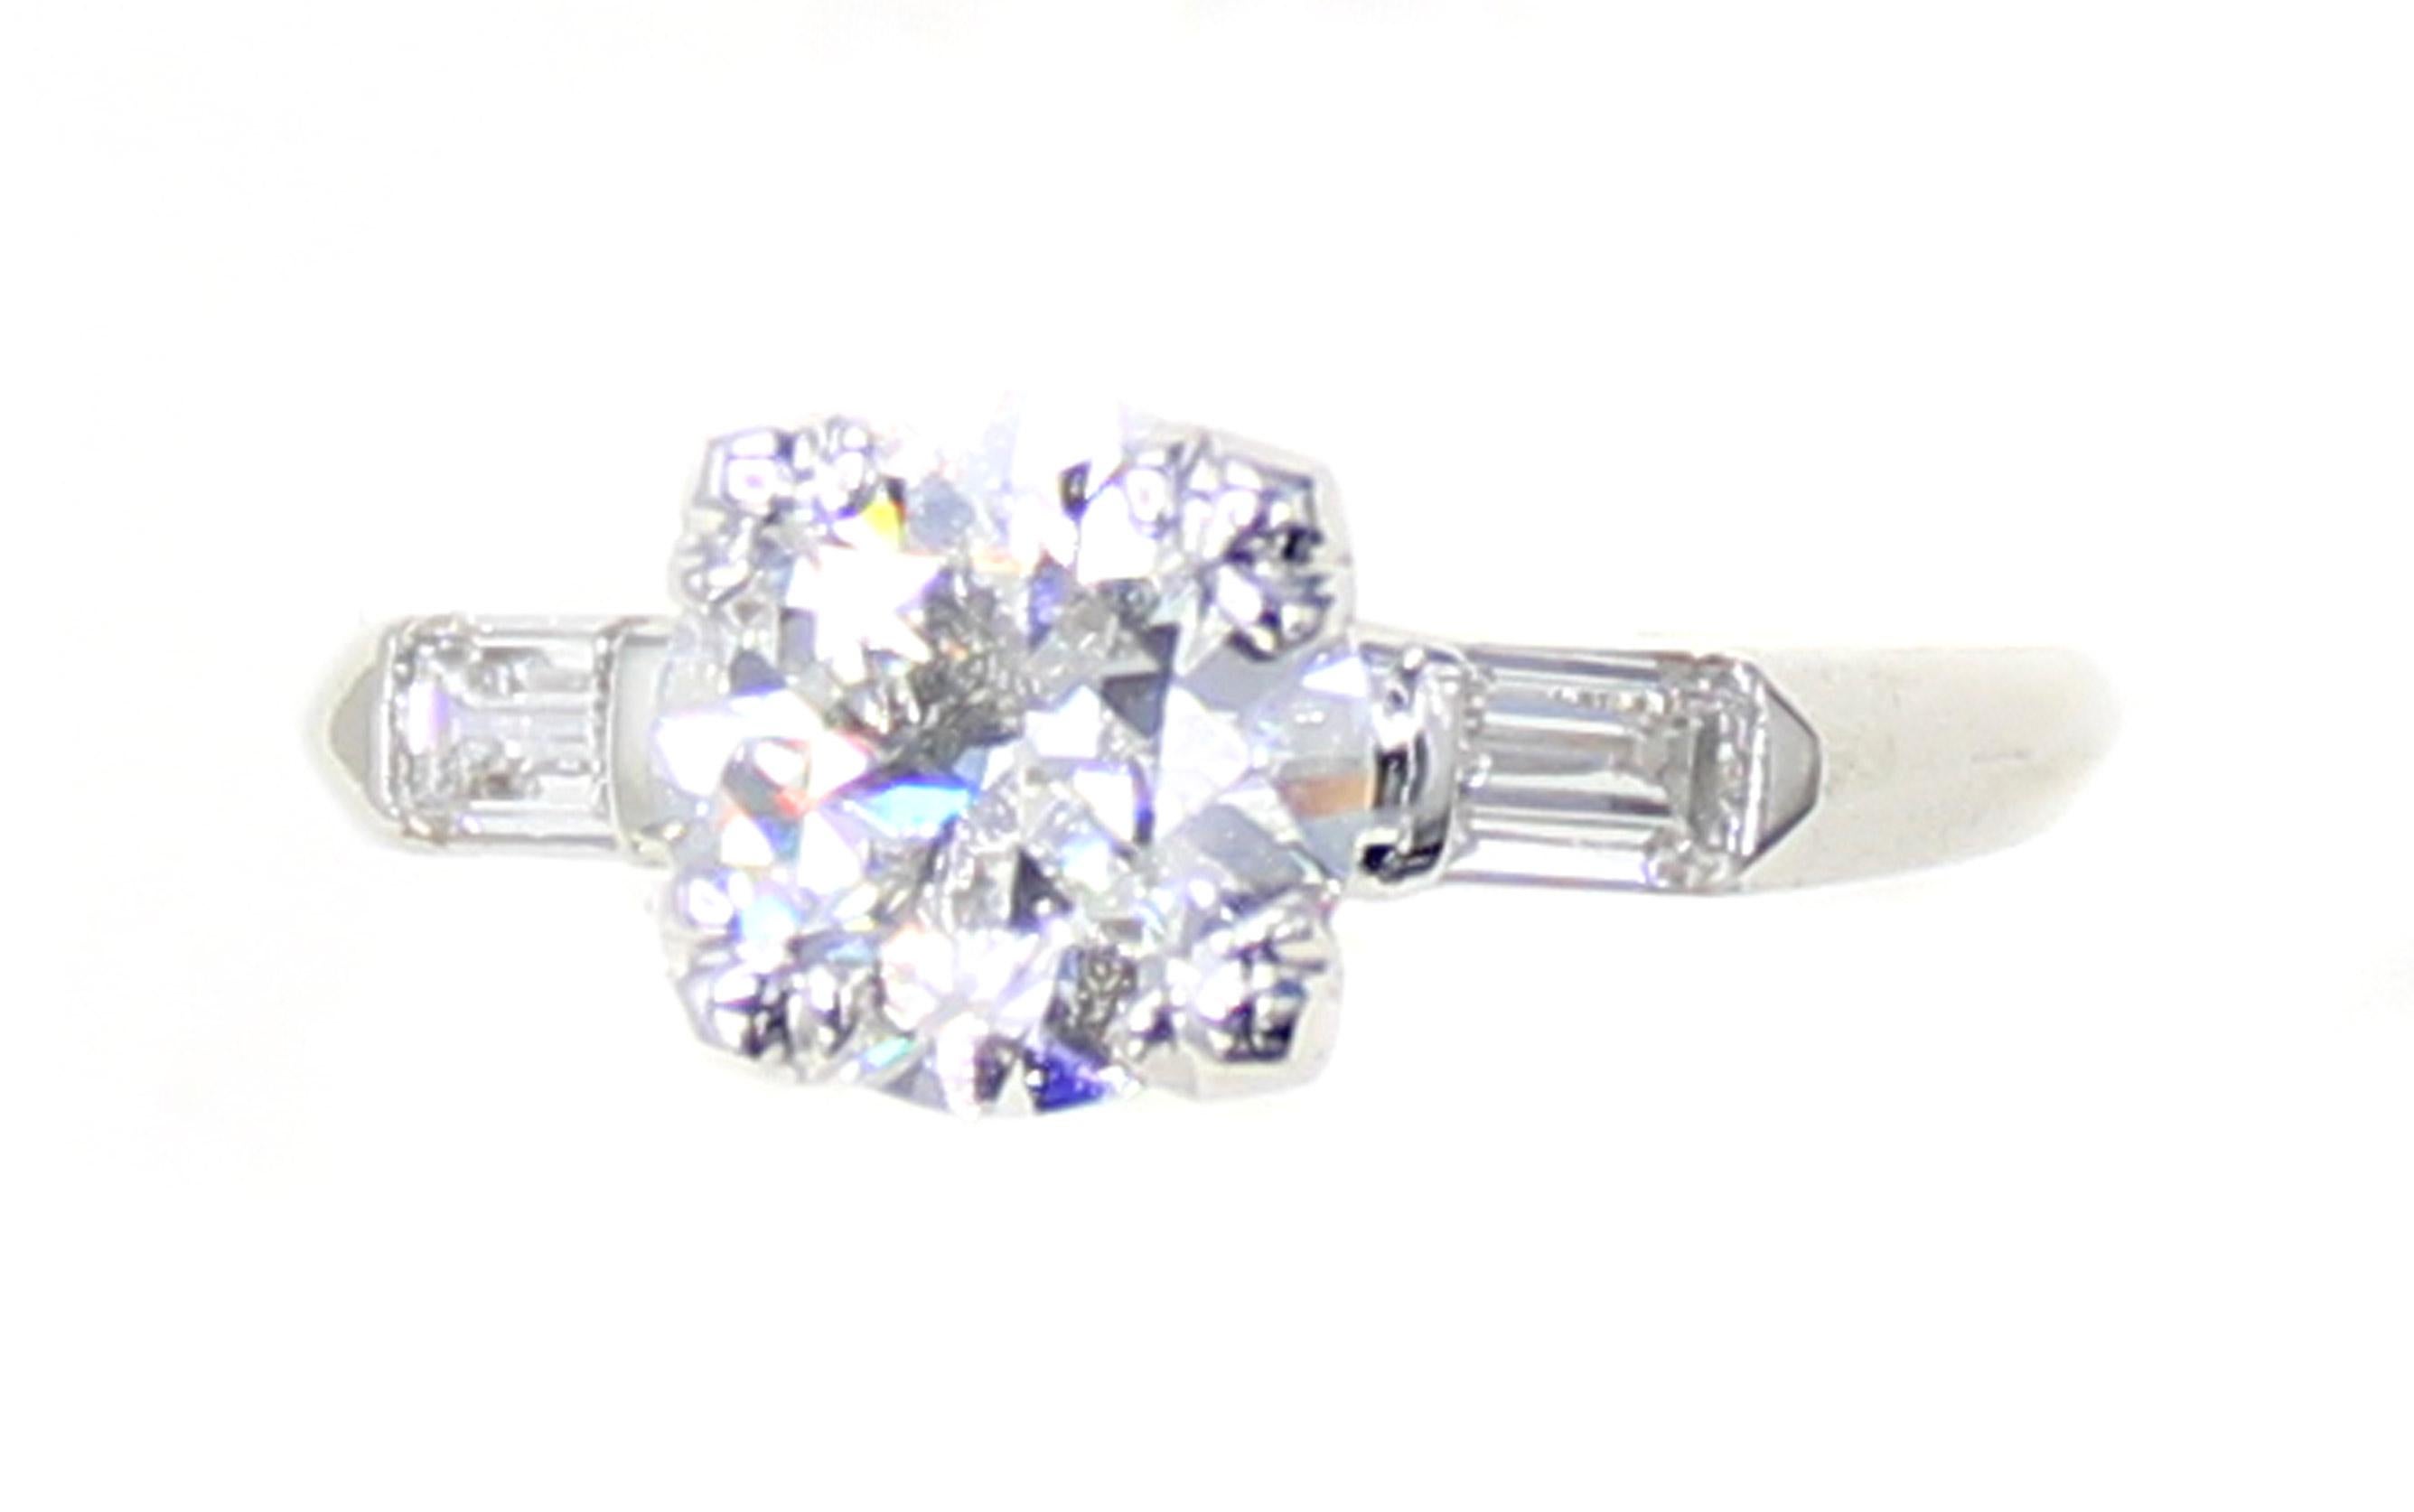 A gorgeous bright white lively Old European Cut diamond is the centerpiece of this platinum baguette diamond handmade engagement ring. Weighing 1.33 carats and accompanied by a report from the GIA giving it a color grade of I and a clarity grade of